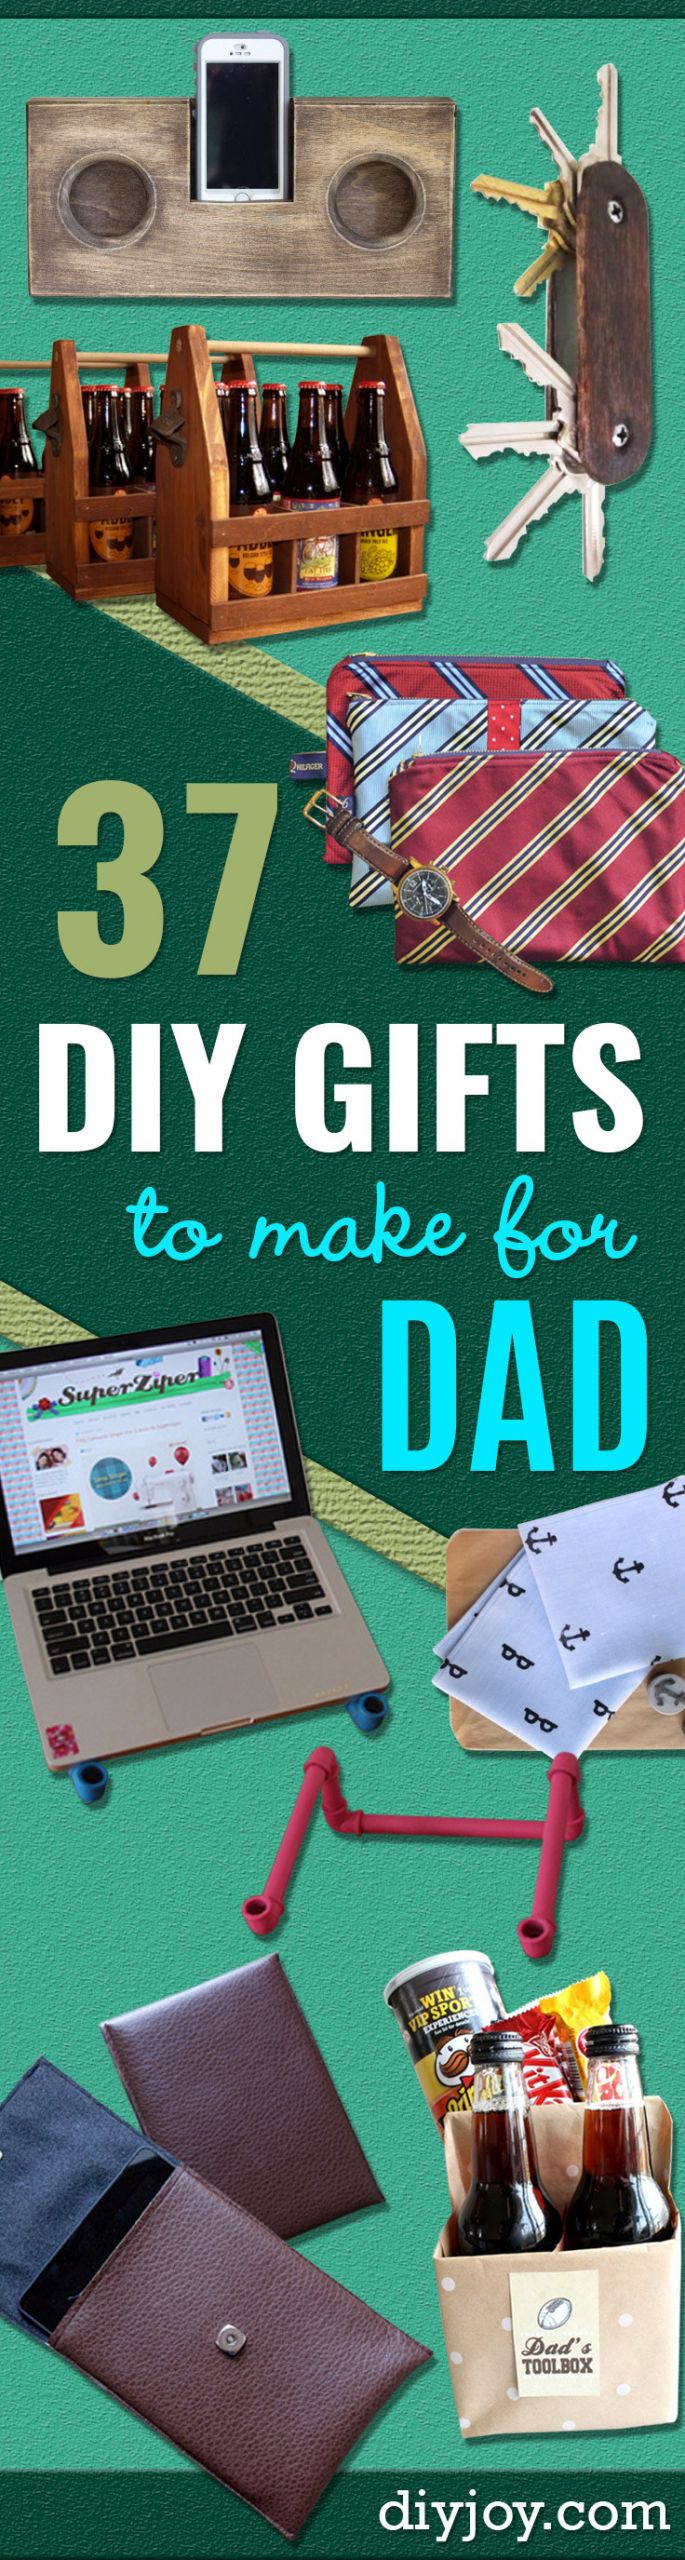 DIY Bday Gifts For Dad
 37 Awesome DIY Gifts to Make for Dad